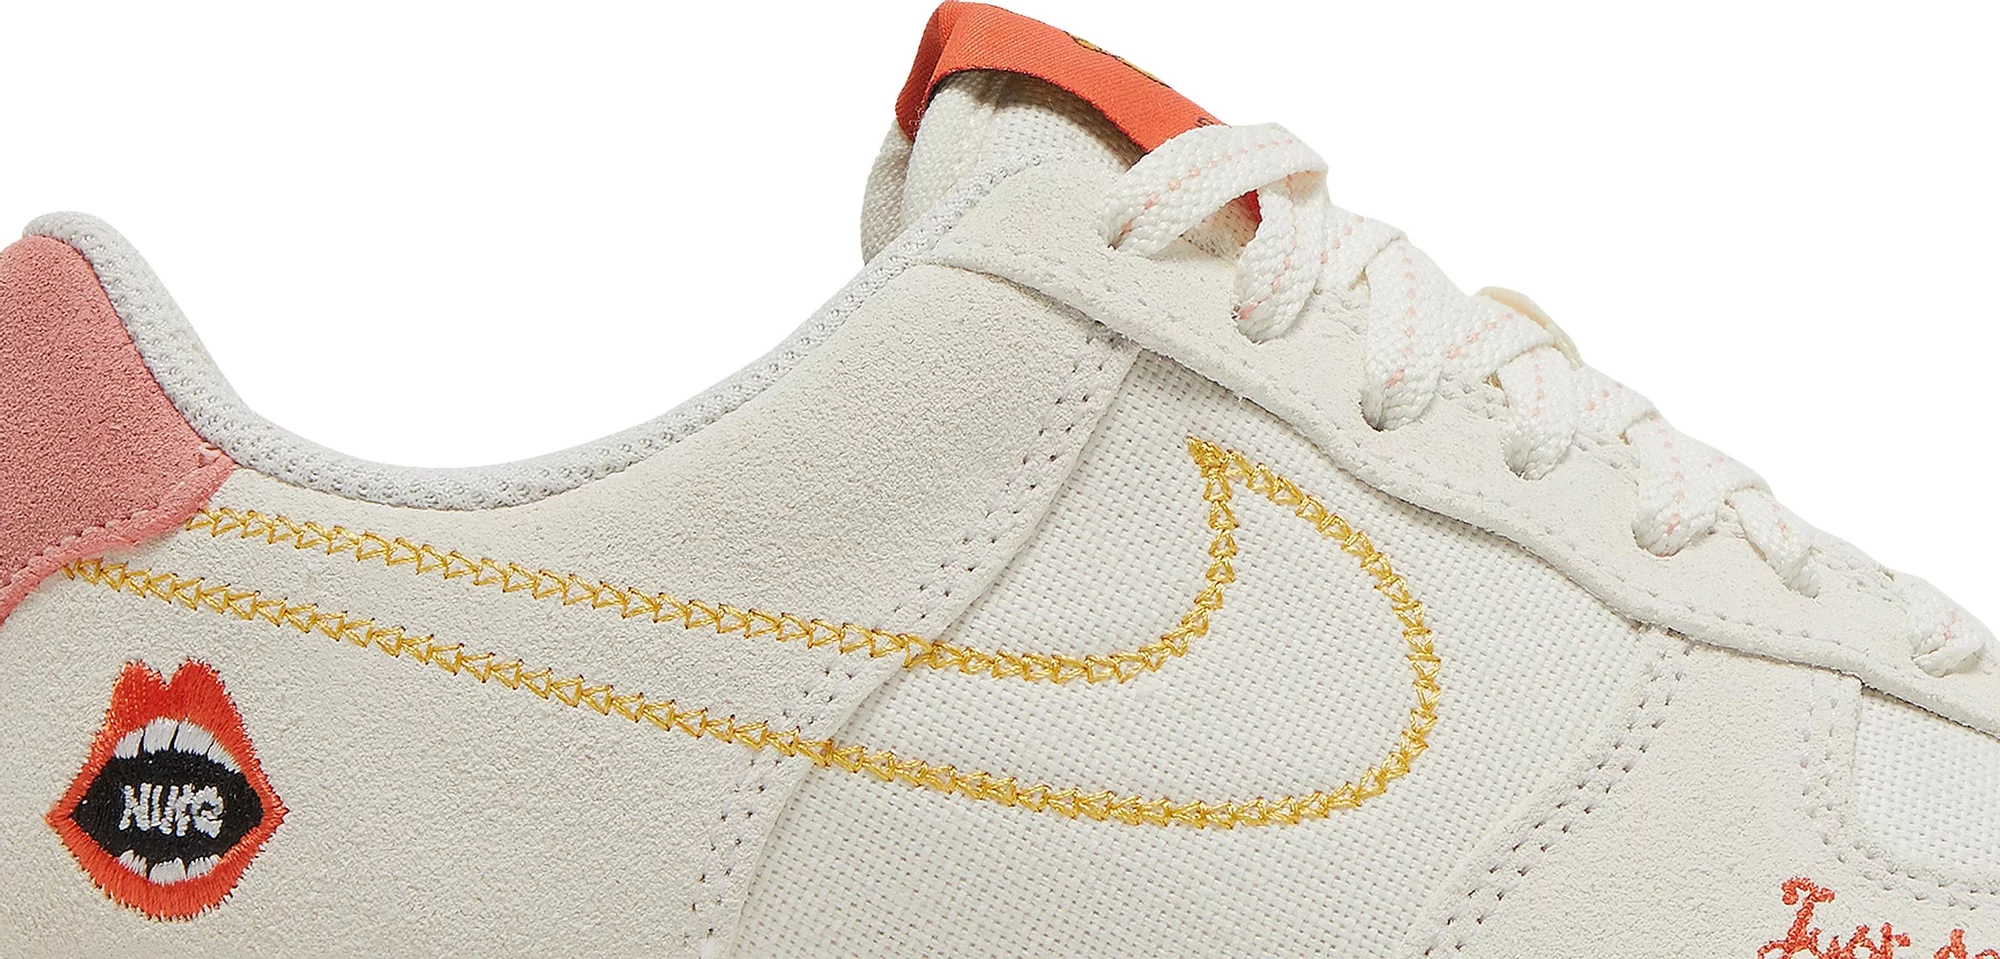 Nike Air Force 1 Low Gucci-Like Colorway